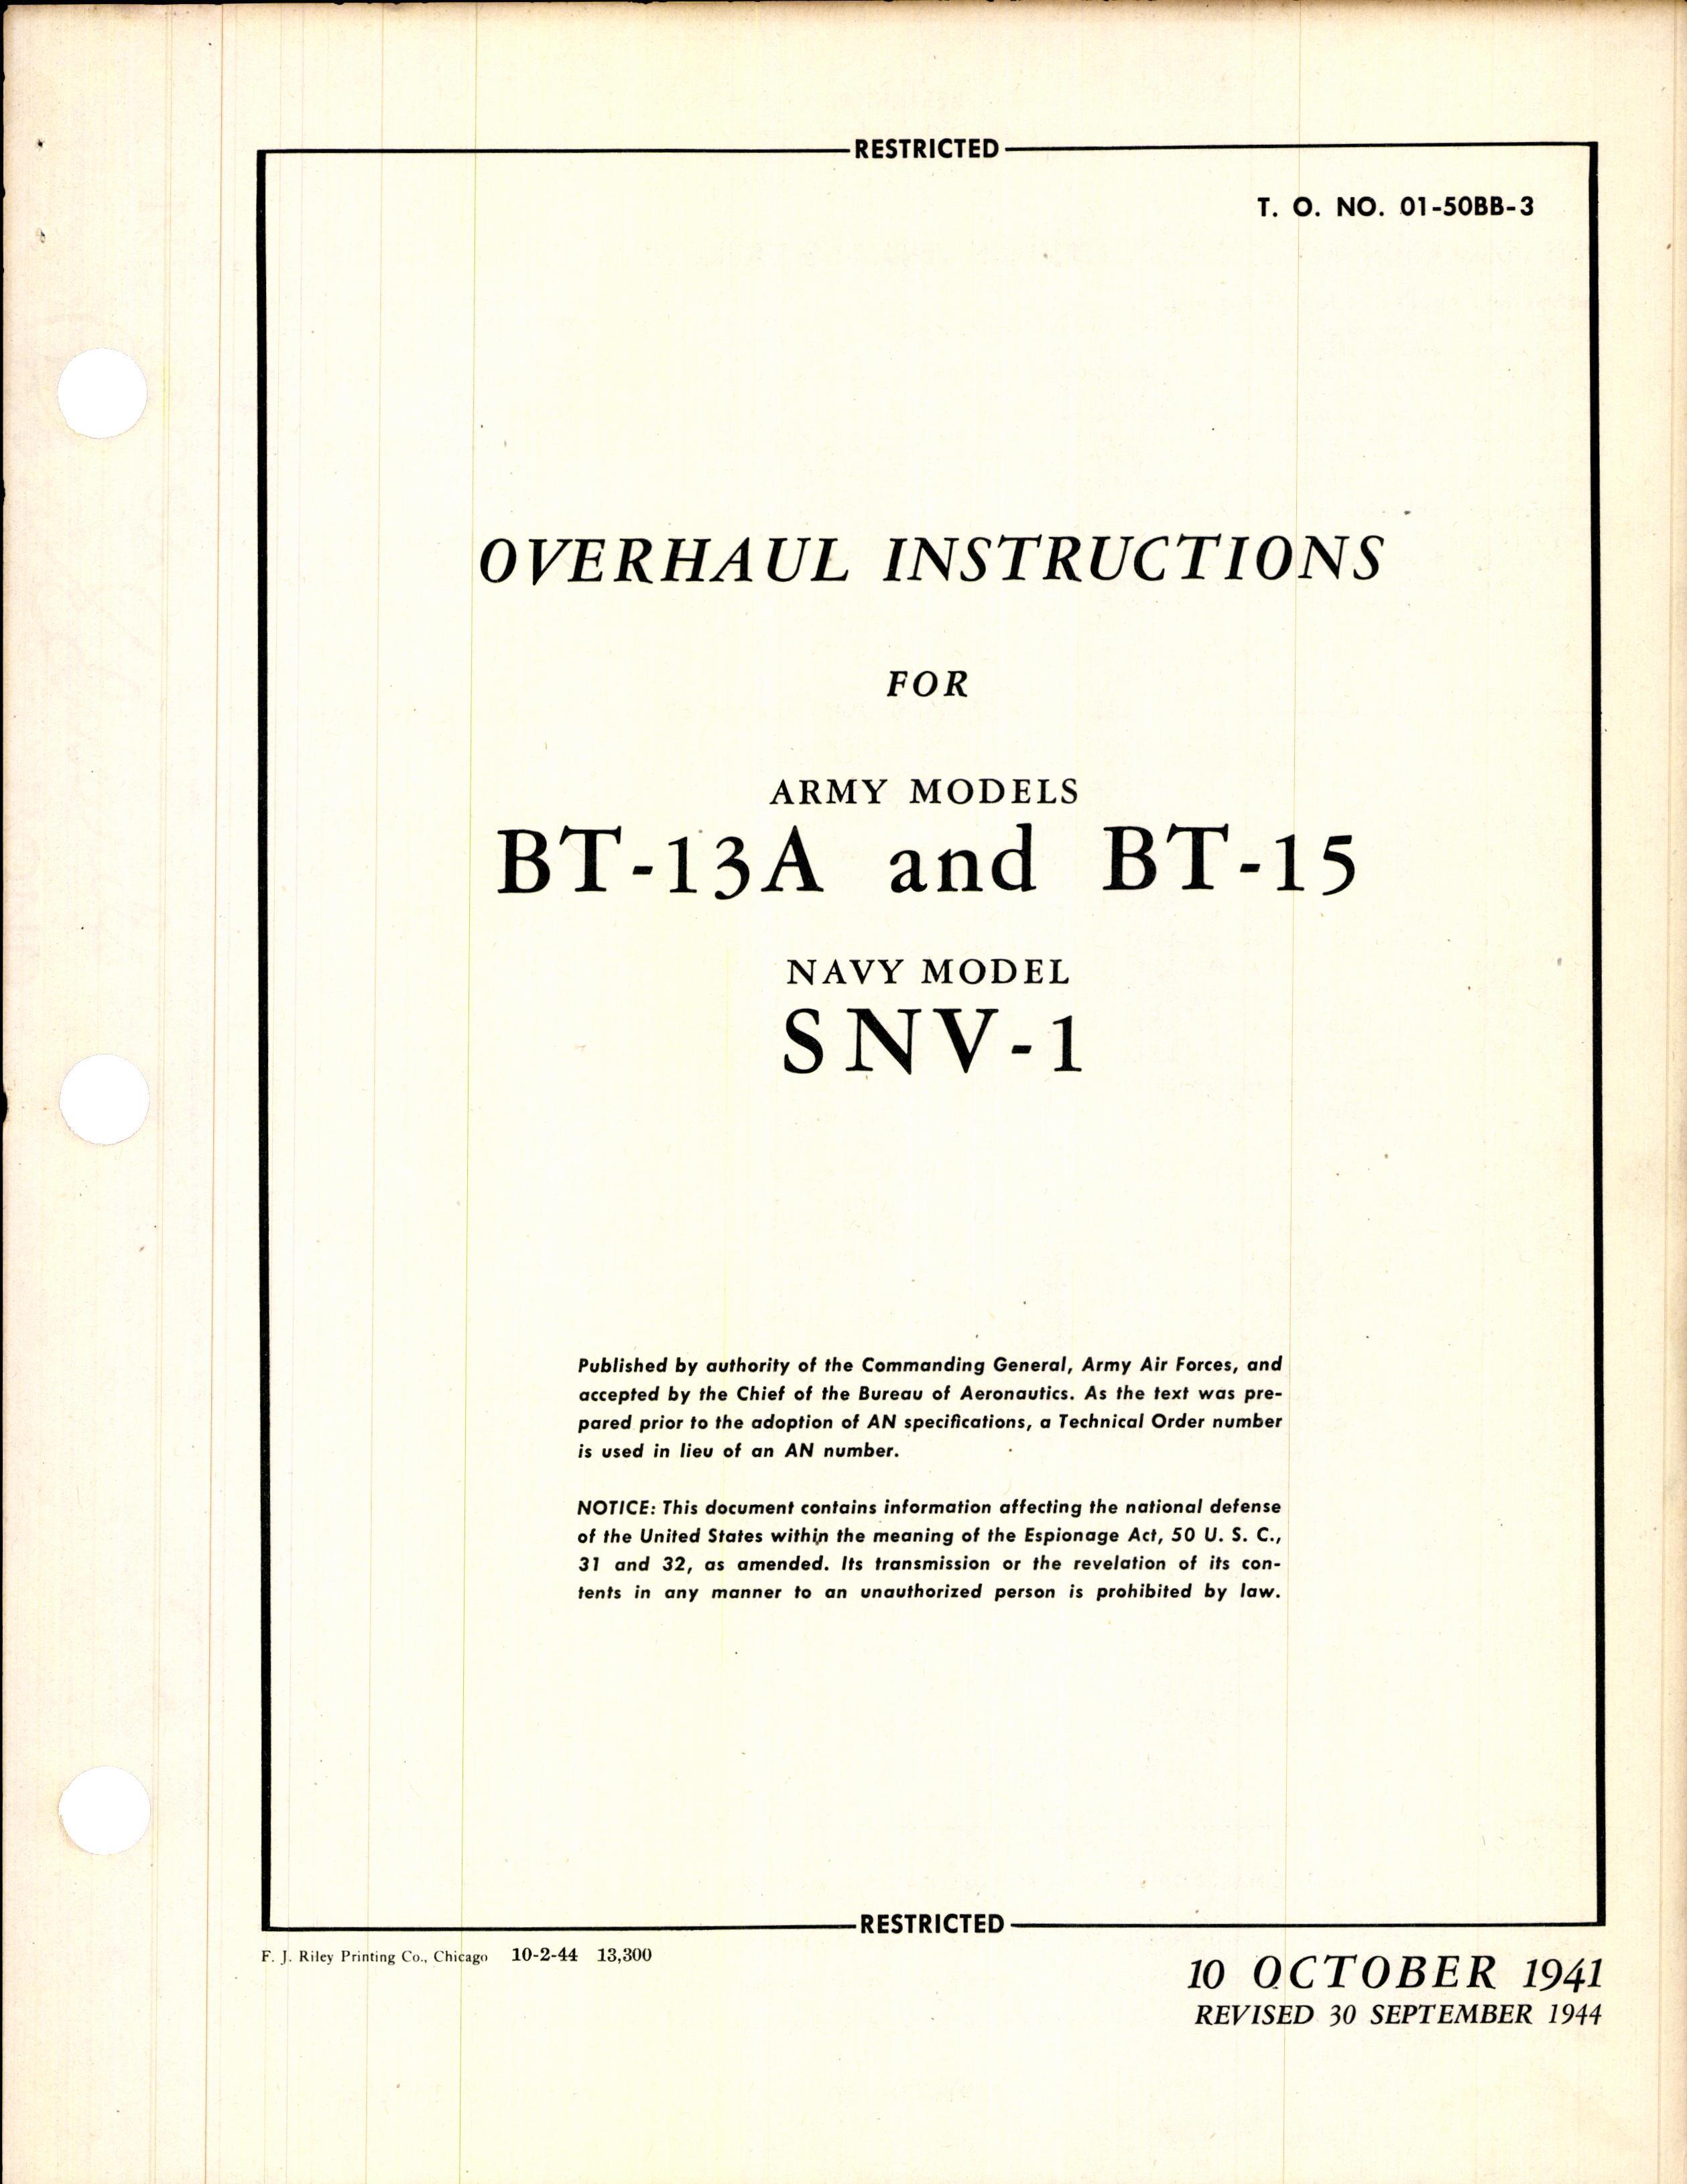 Sample page 1 from AirCorps Library document: Overhaul Instruction for BT-13A and BT-15 and SNV-1